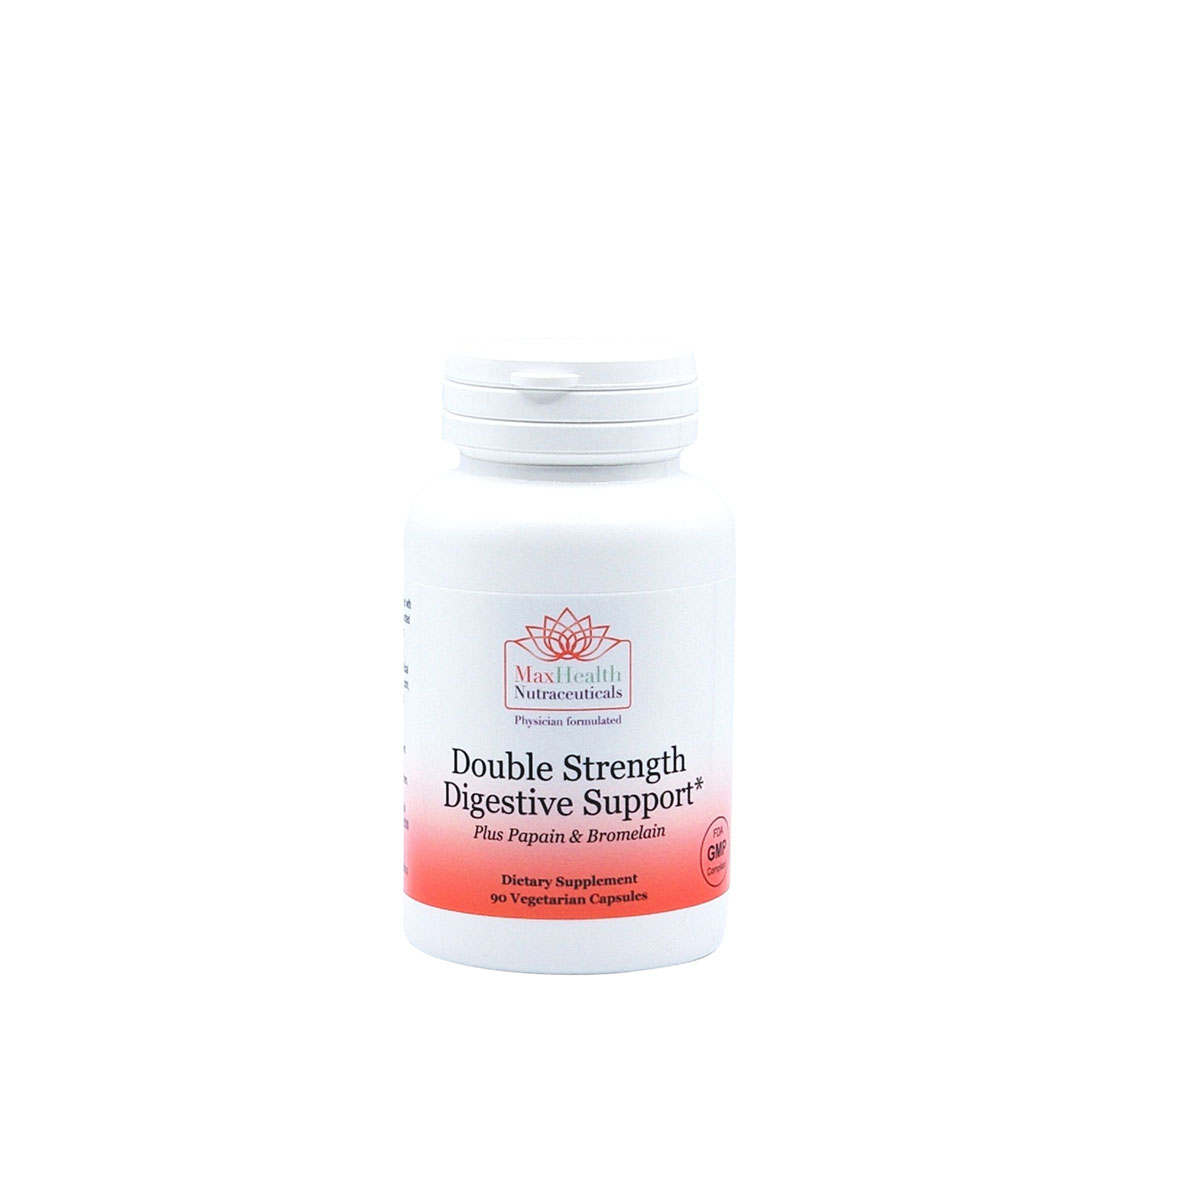 11Double Strength Digestive Support plus Papain and Bromelain